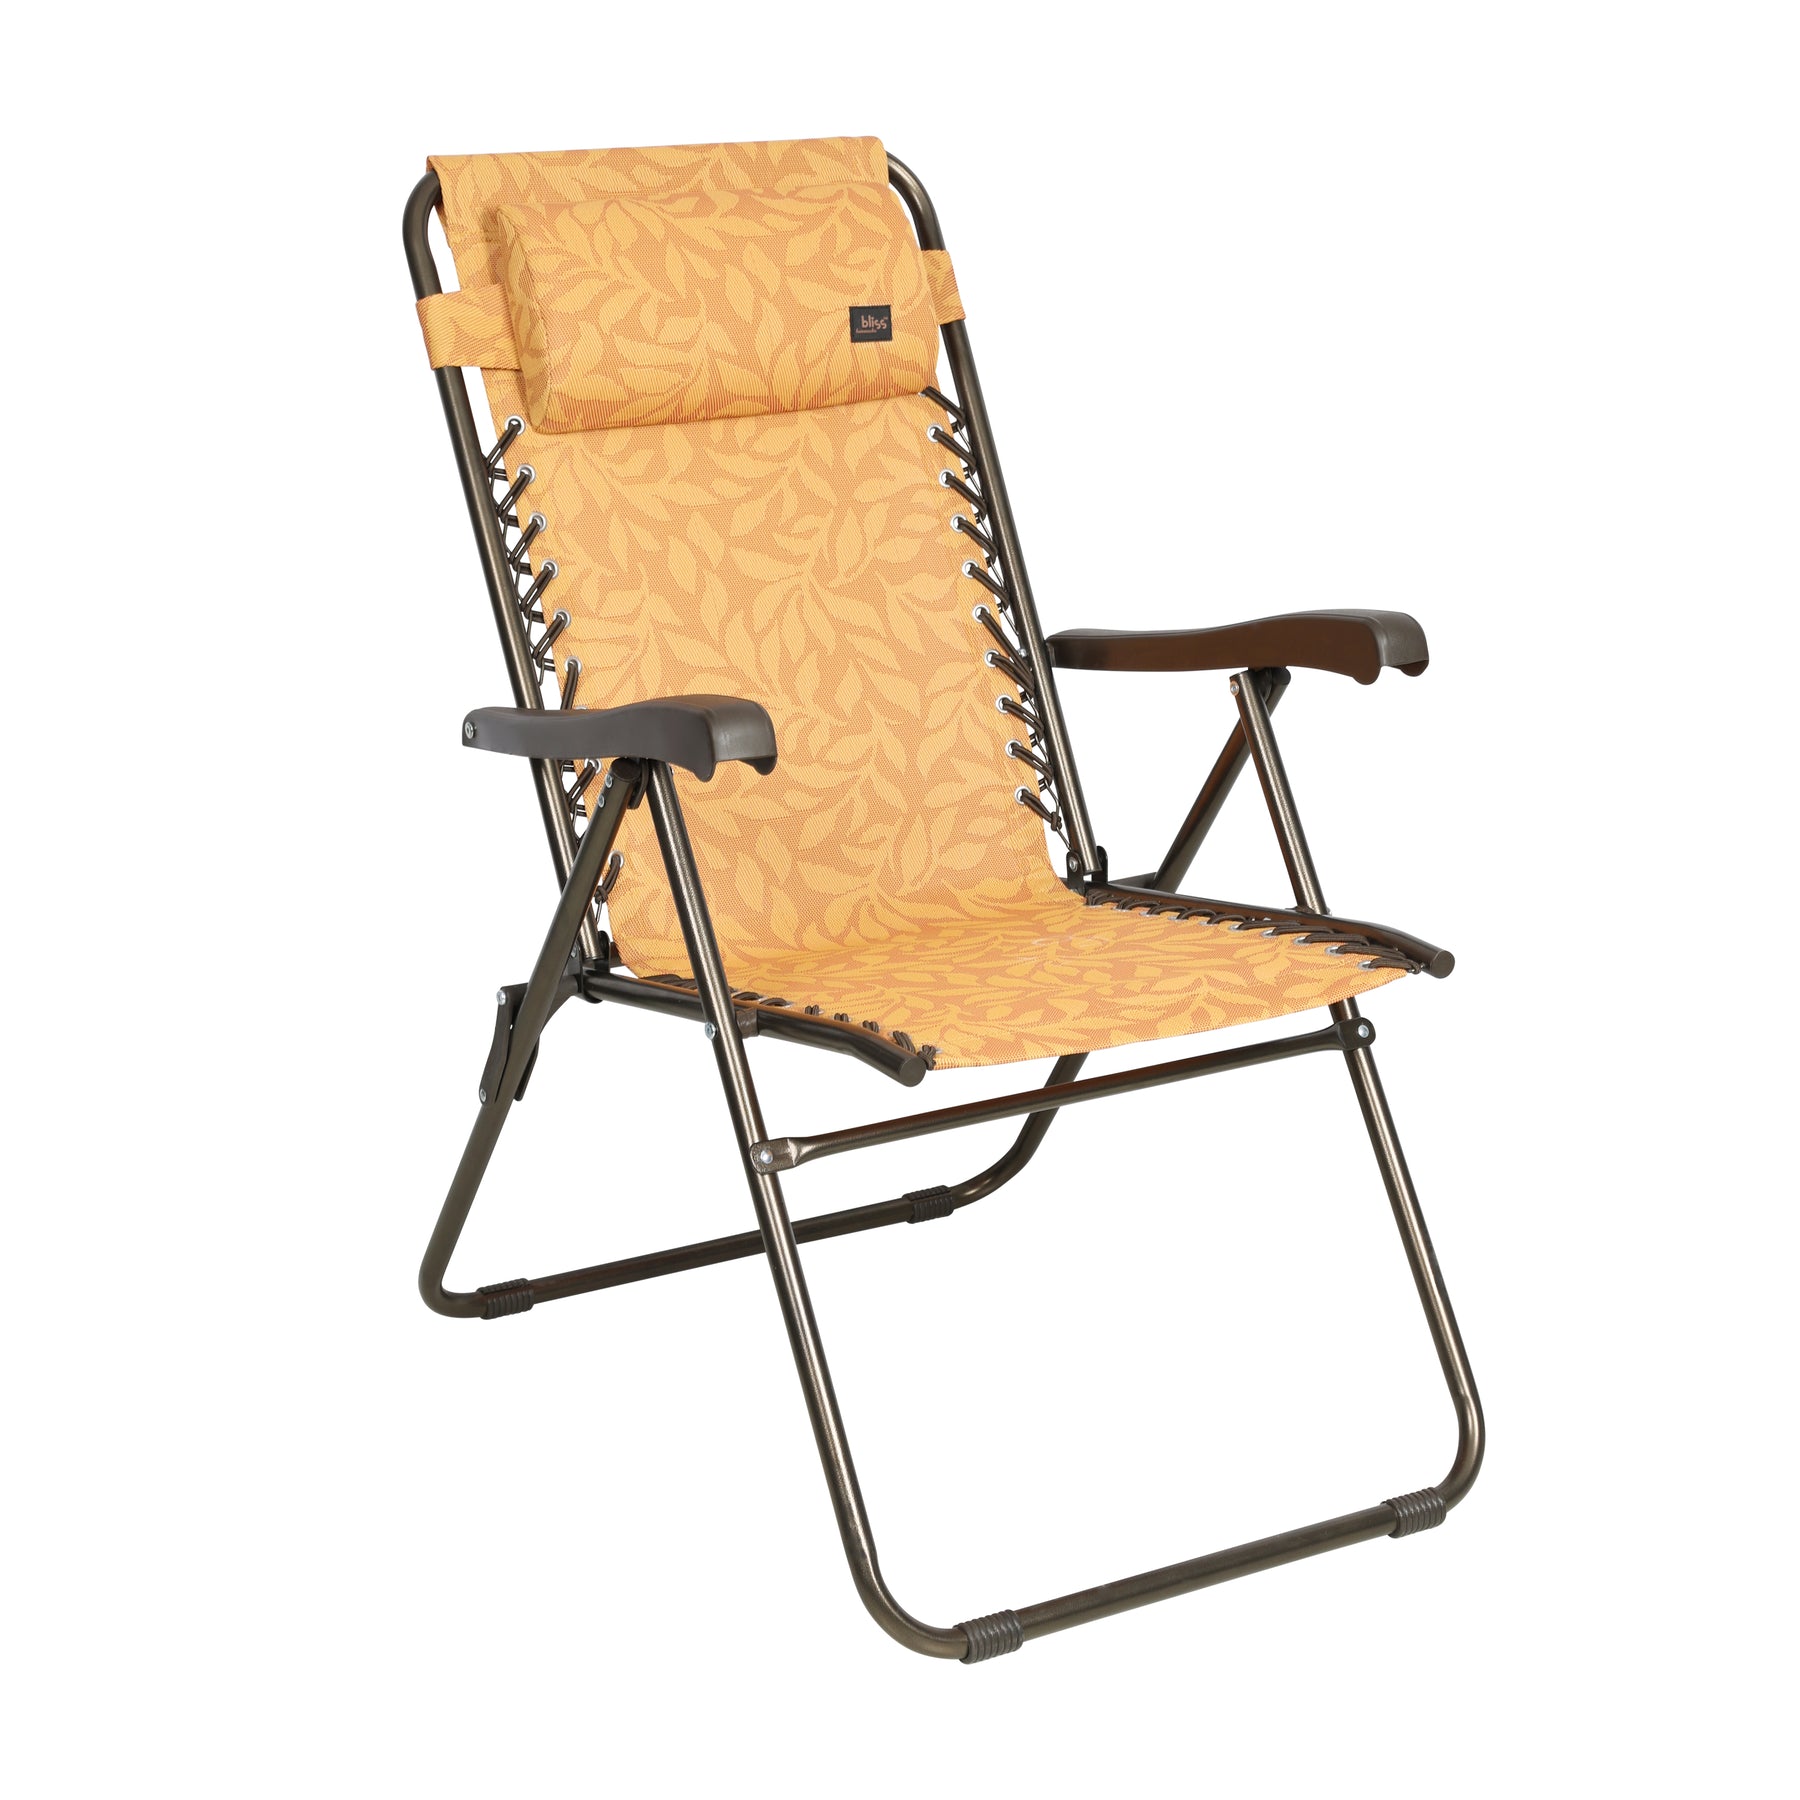 Bliss Hammocks 26-inch Wide Reclining Sling Chair with Pillow in the amber leaf variation: an orange color with a light orange leaf pattern.